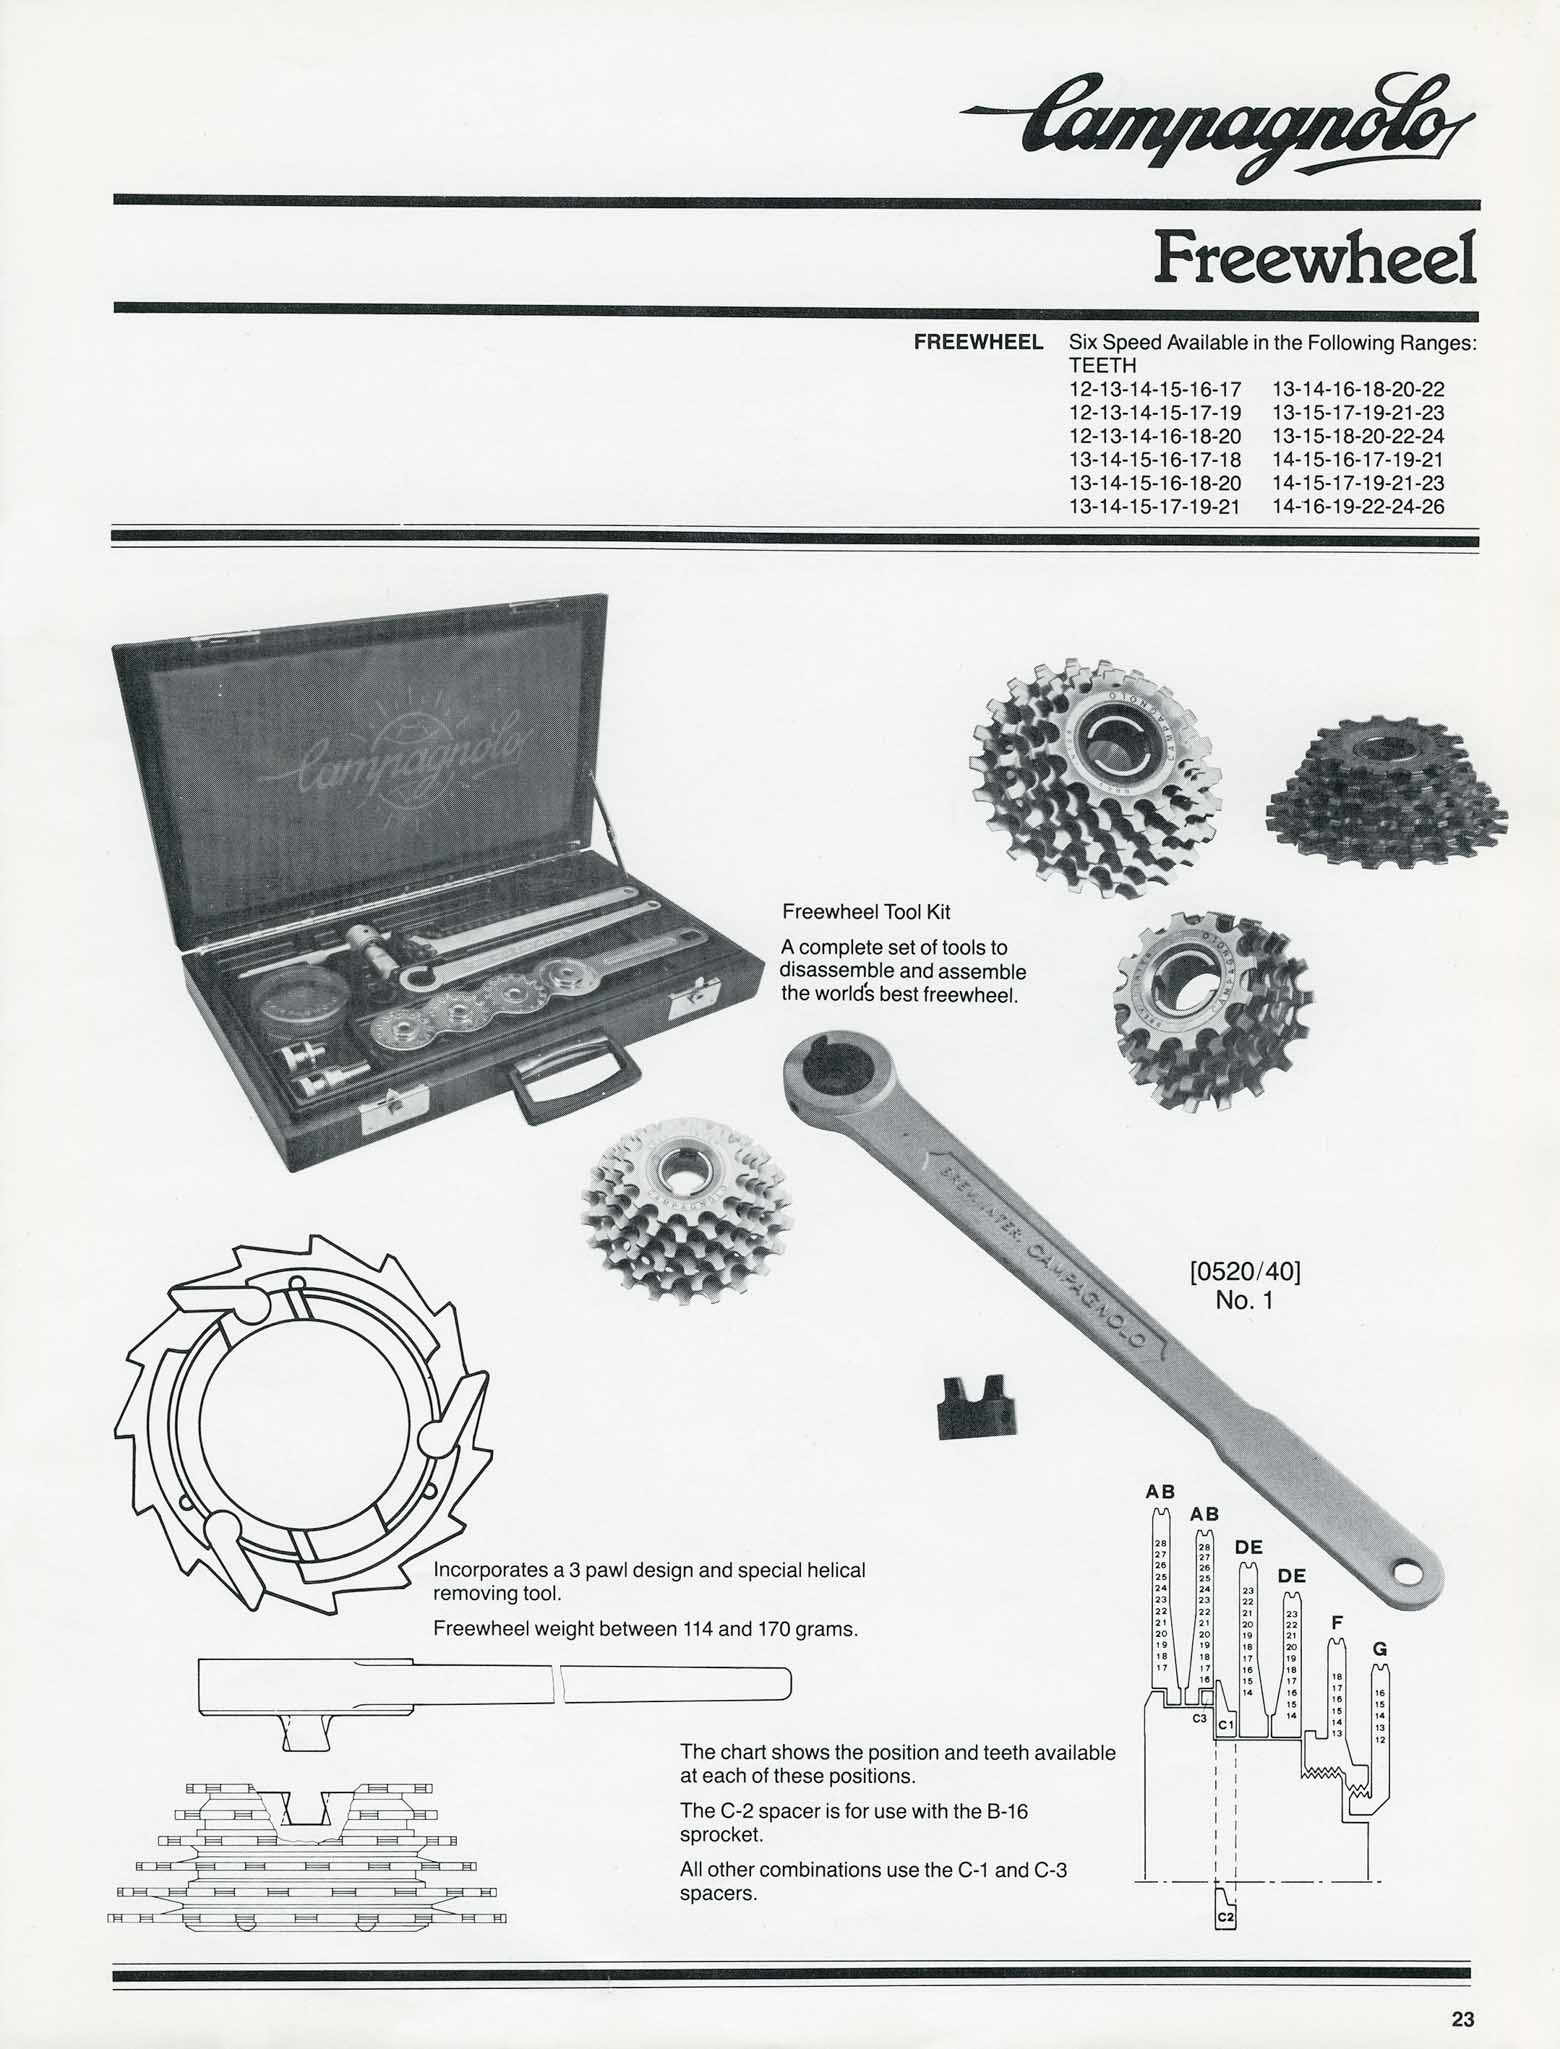 Campagnolo - Bicycle Components 1982 page 23 main image